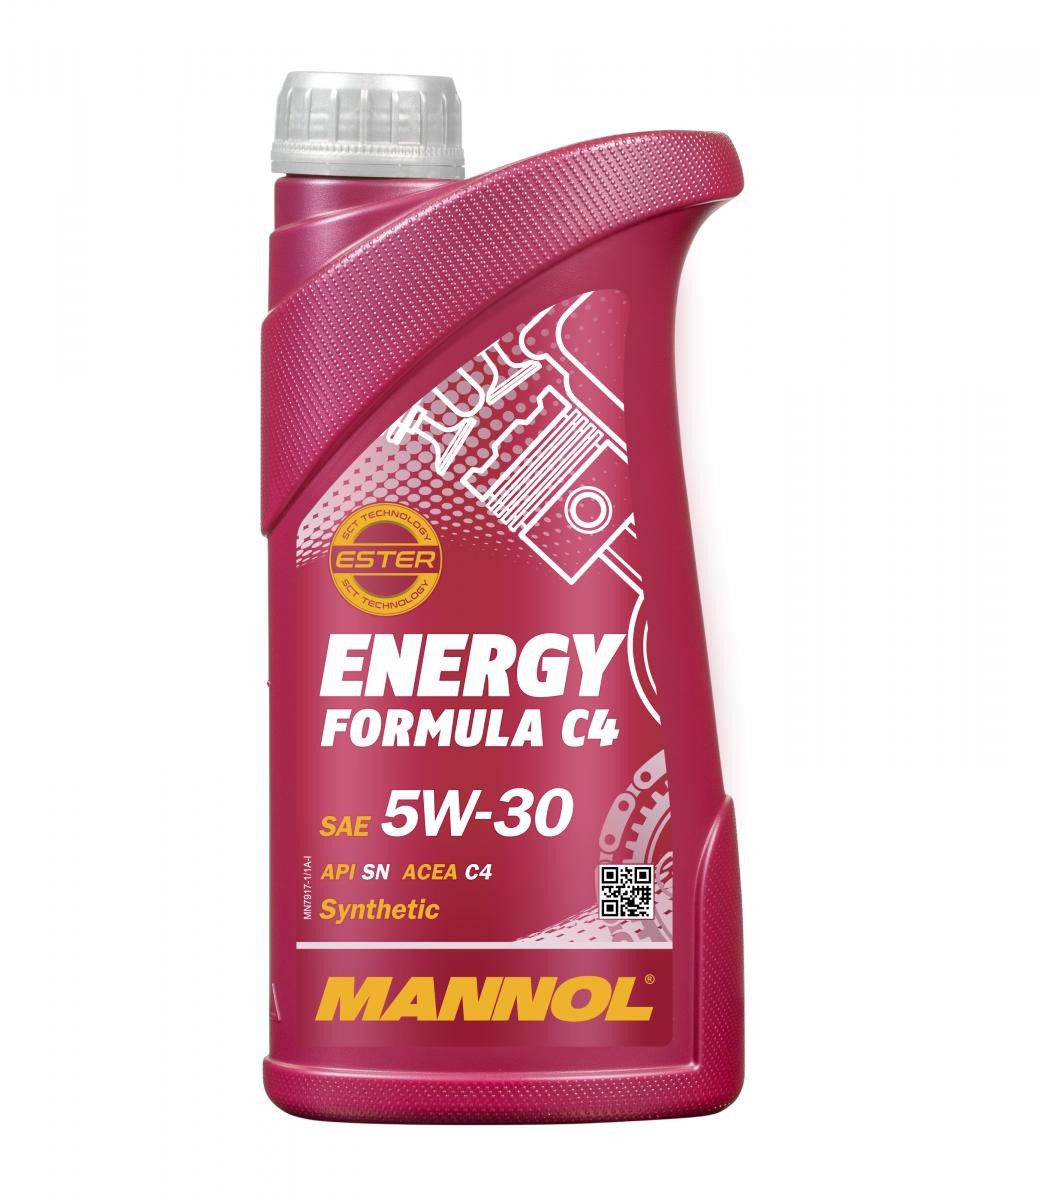 MANNOL ENERGY, FORMULA C4 MN7917-1 Engine oil 5W-30, 1l, Synthetic Oil